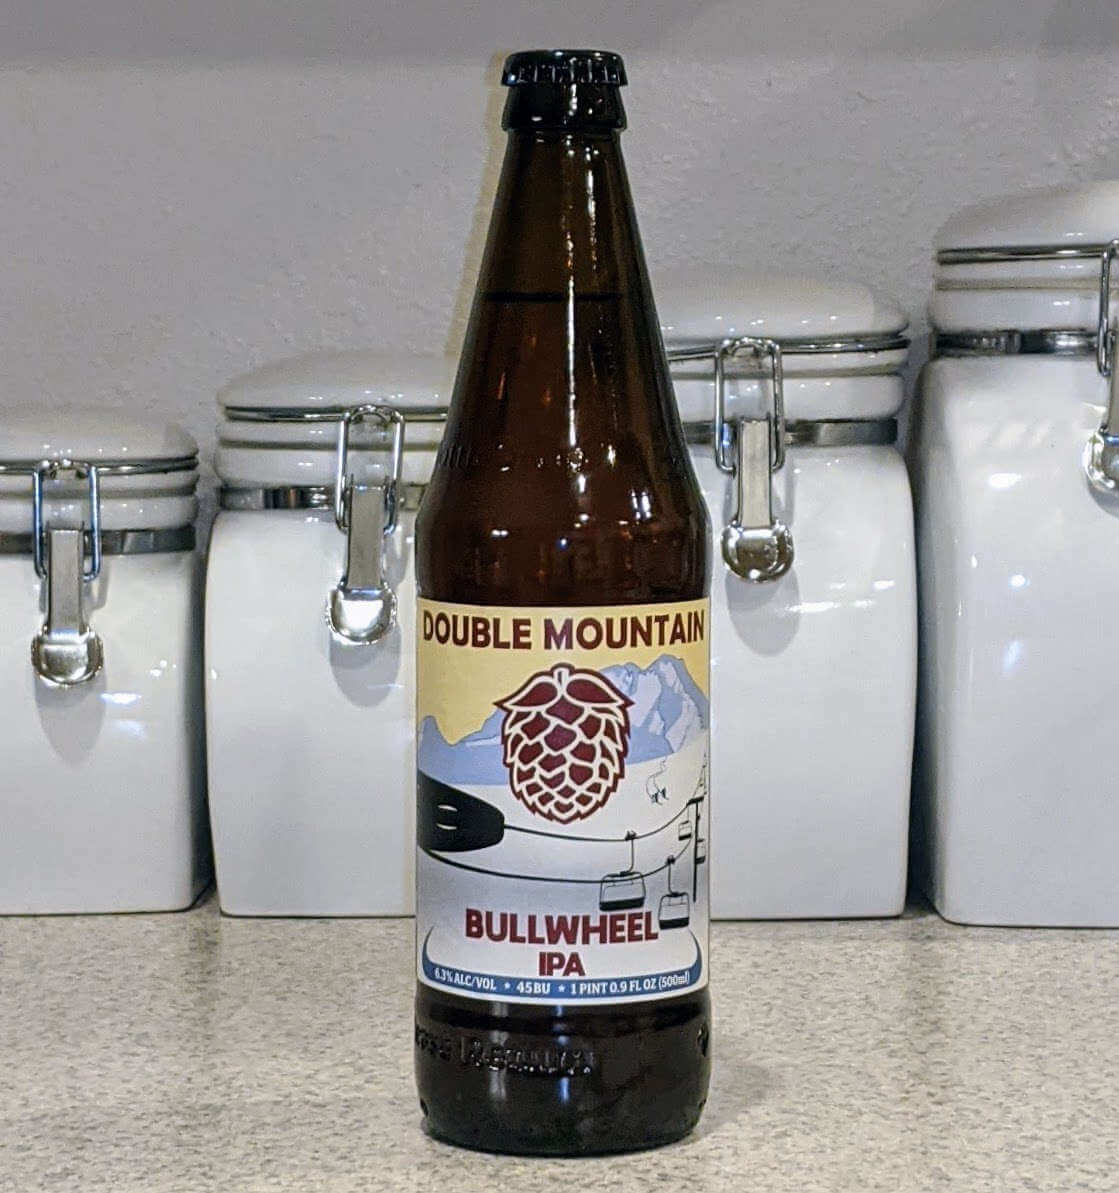 Received: Double Mountain Brewery Bullwheel IPA